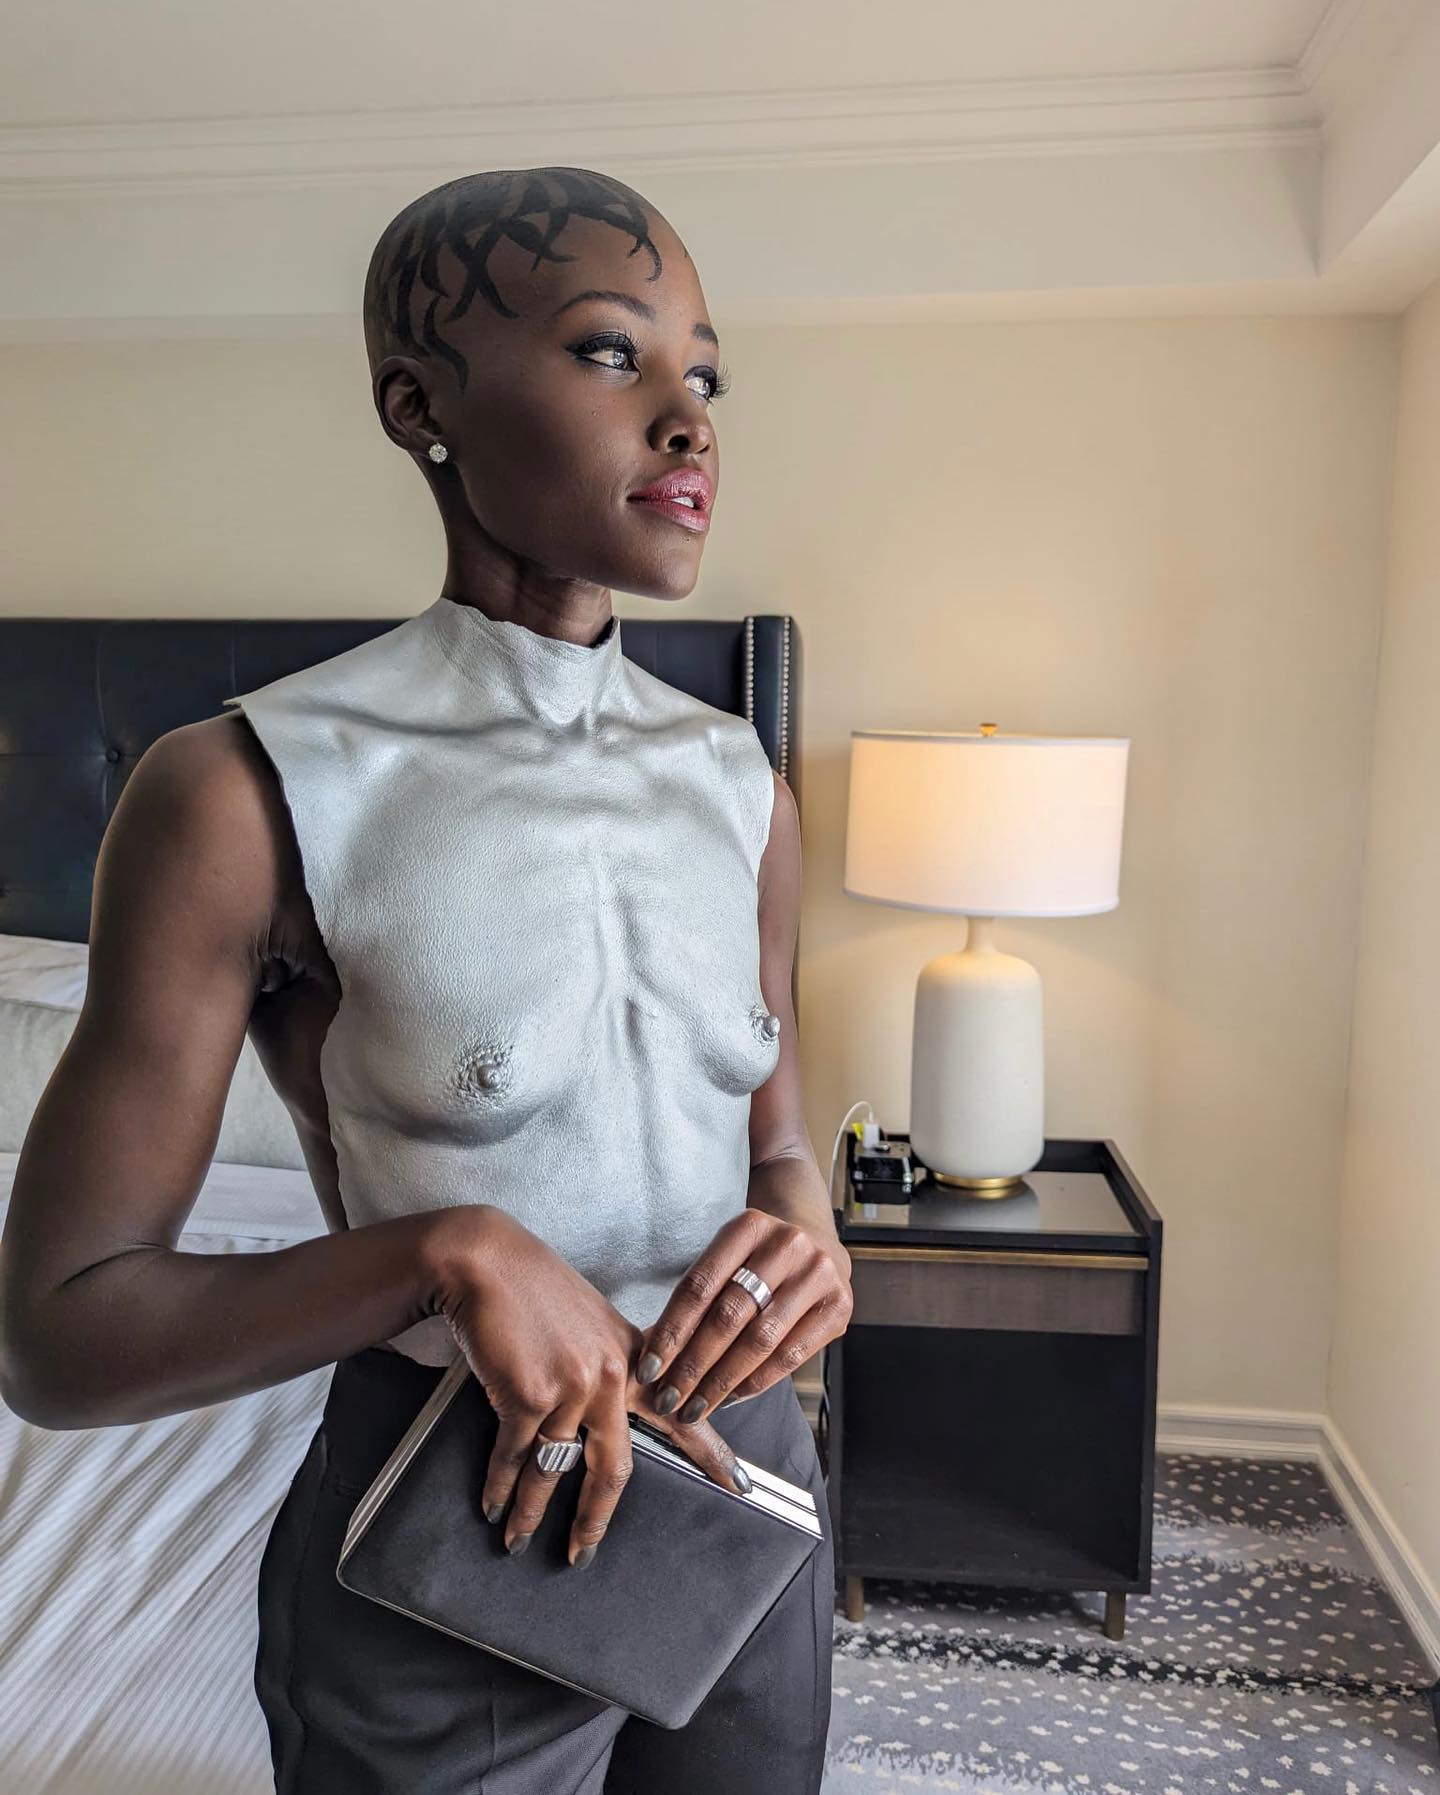 Lupita Nyong'o Biography: Husband, Age, Movies, Net Worth, Parents, Family, Instagram, Height, Children